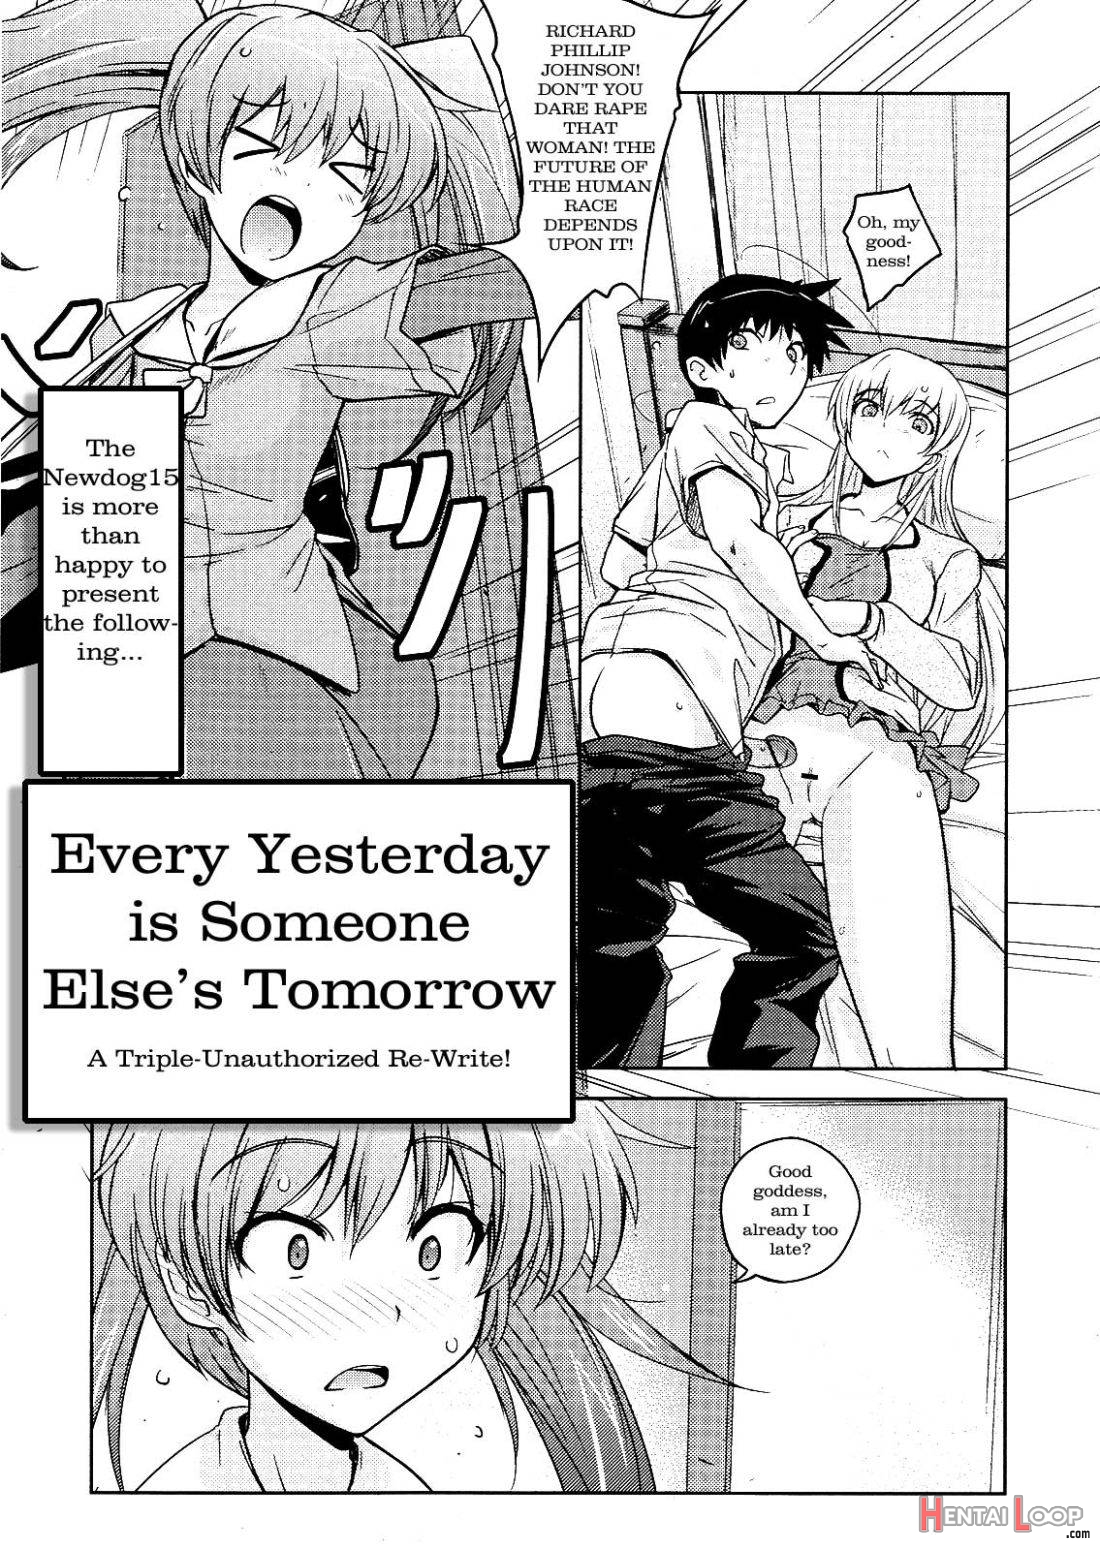 Every Yesterday is Someone Else’s Tomorrow page 2